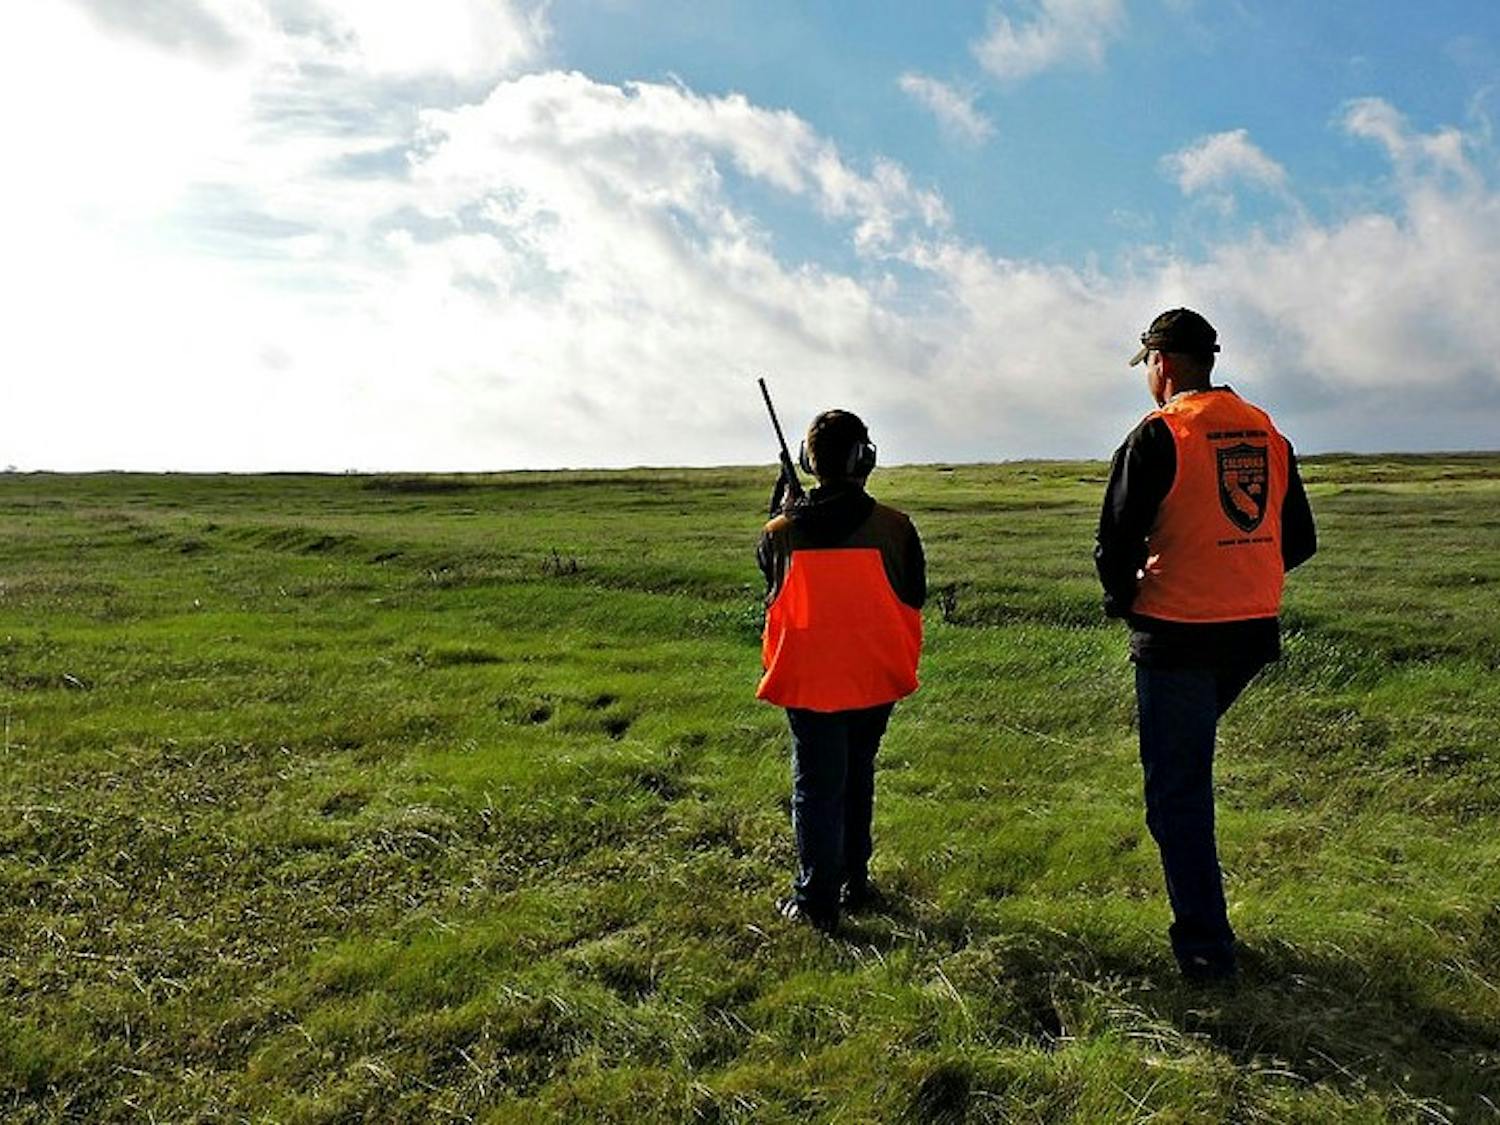 Children of any age can now hunt legally in Wisconsin.